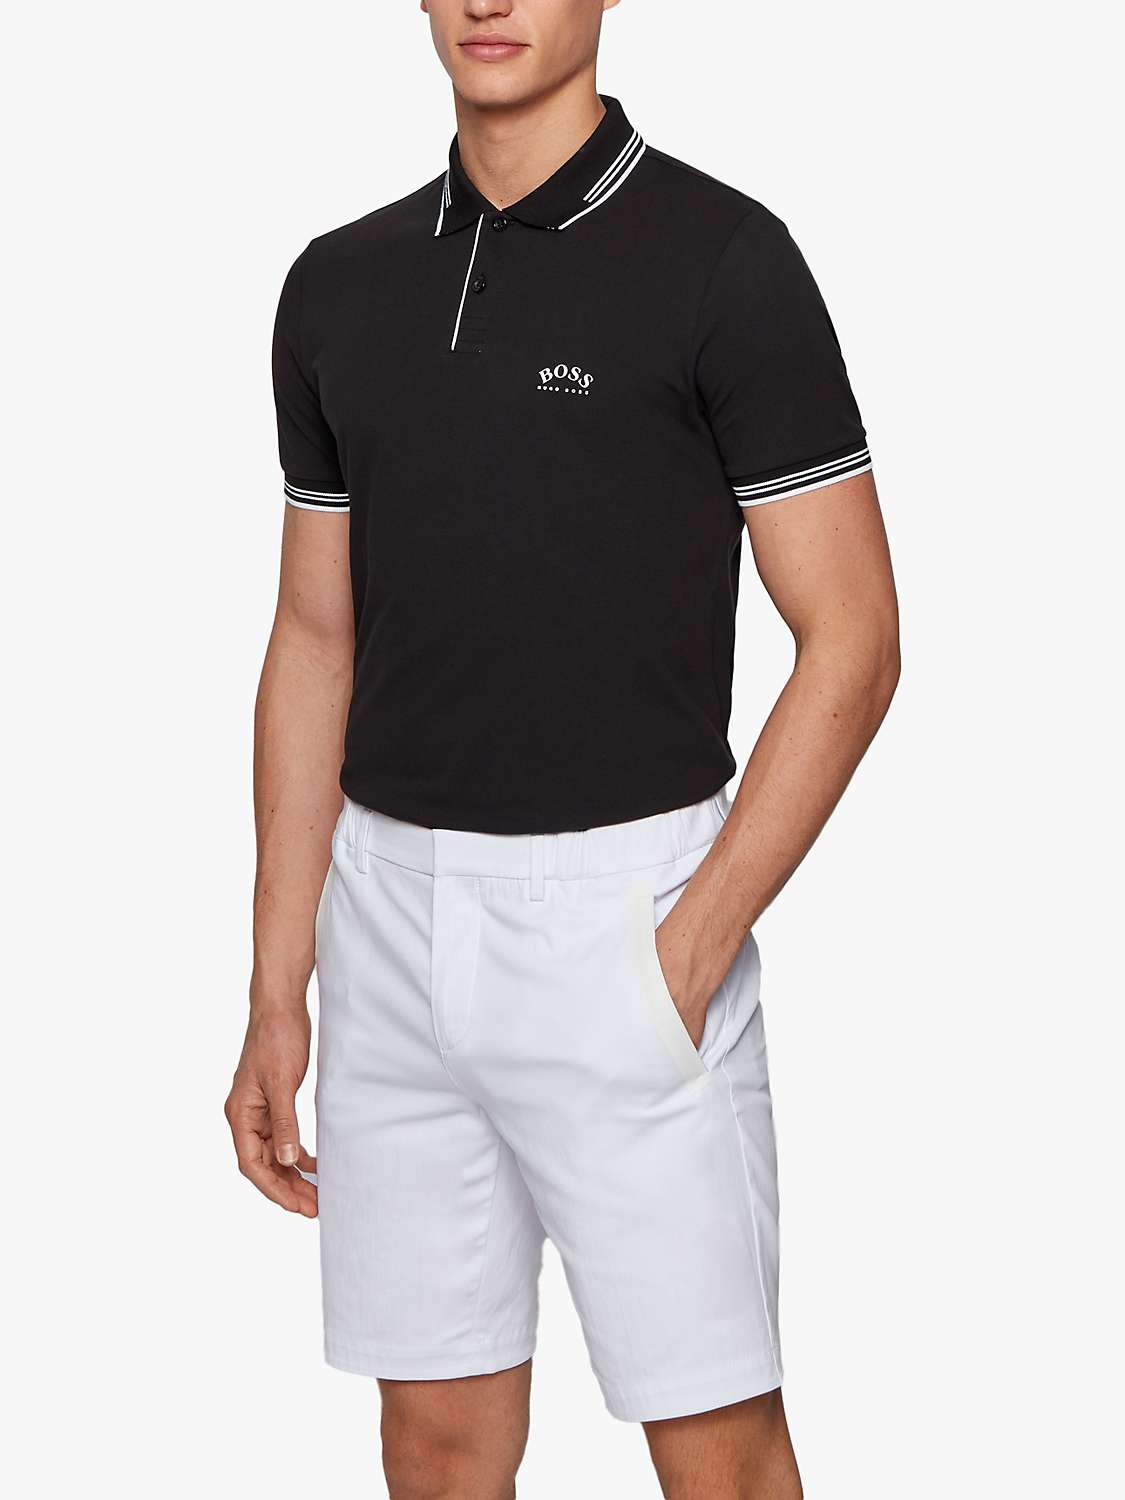 Buy BOSS Paul Curve Short Sleeve Polo Shirt, Charcoal Online at johnlewis.com